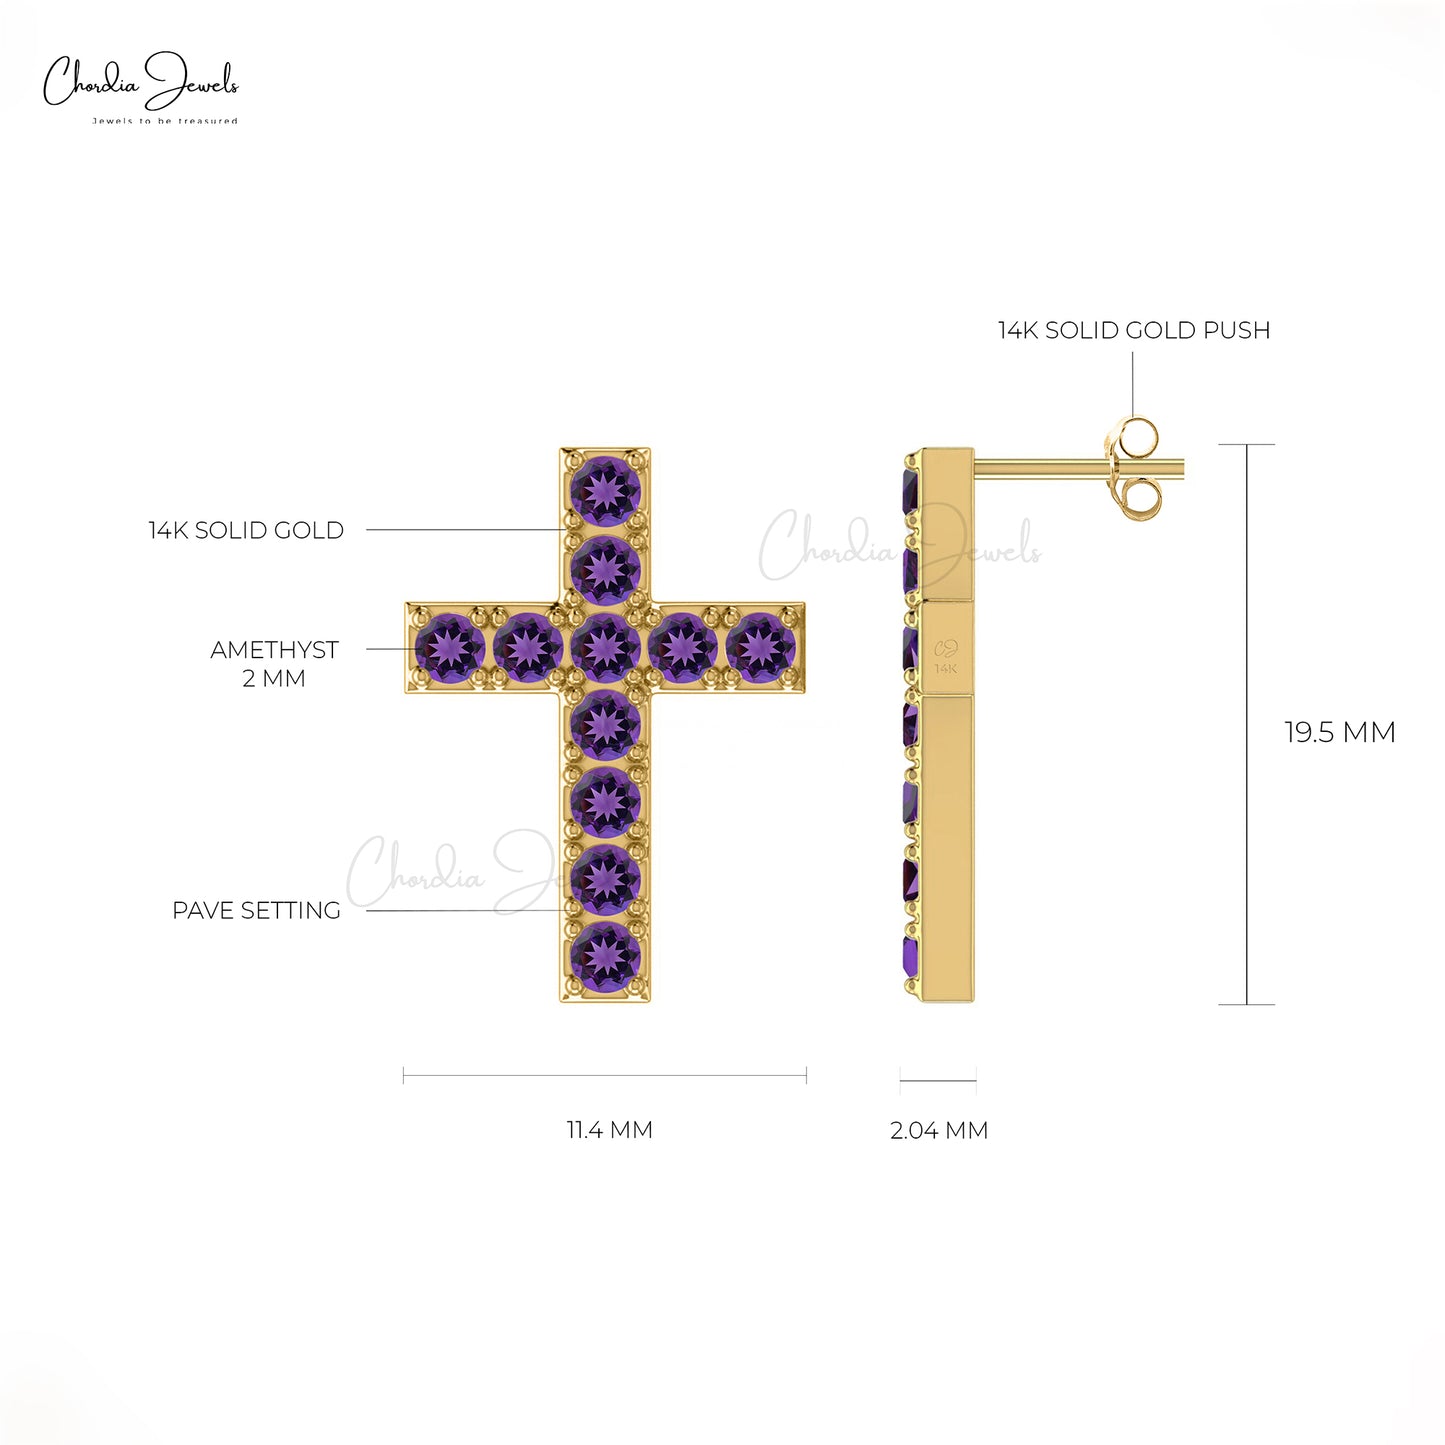 Genuine Amethyst 2mm Round Cut Natural Gemstone Religious Studs, 1.32 Ct February Birthstone Cross Stud Earrings, 14k Solid Gold Gemstone Jewelry For Birthday Gift